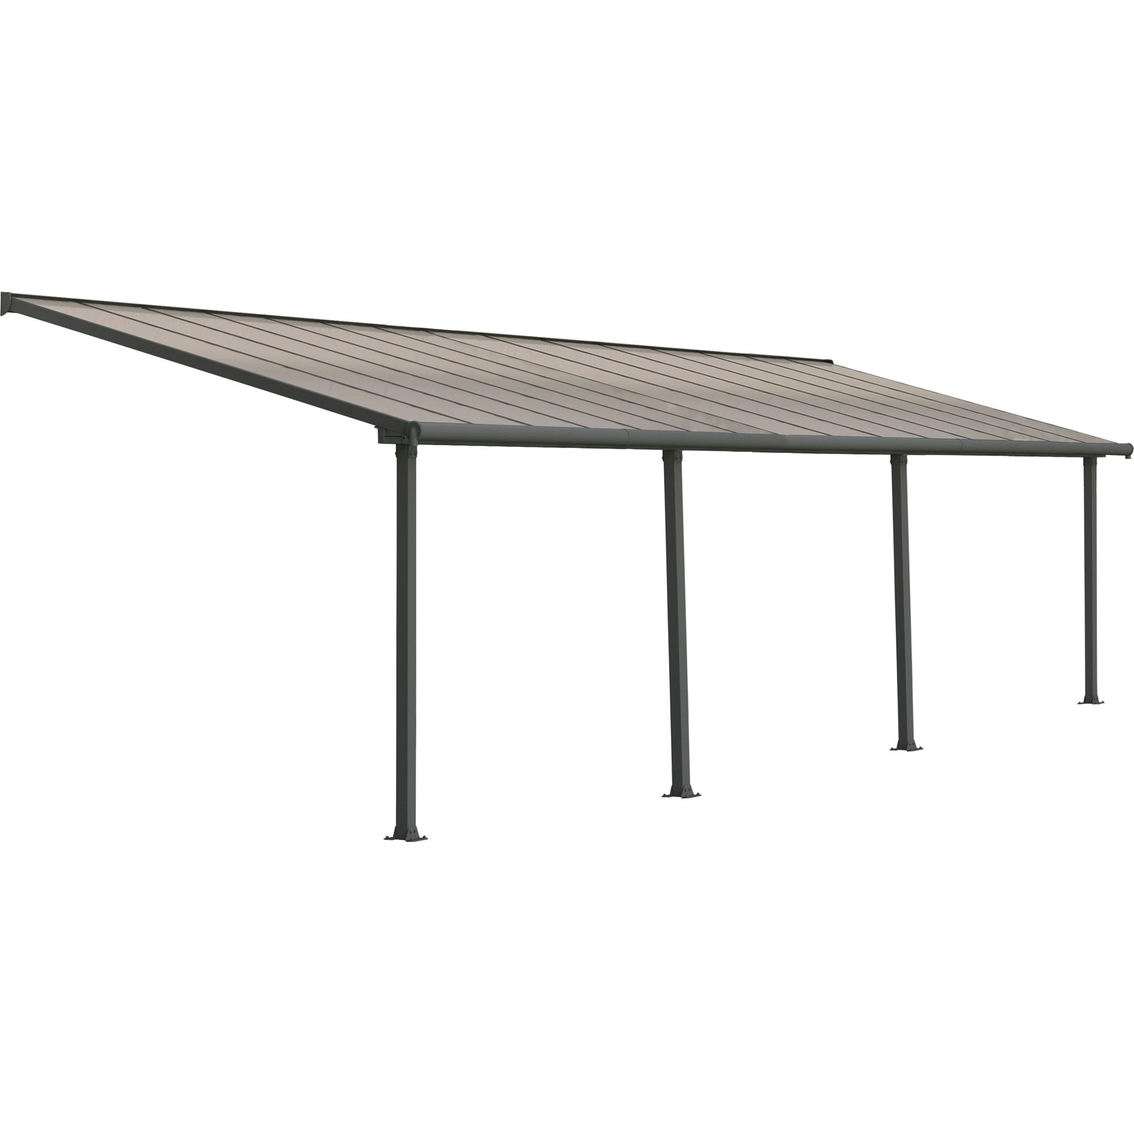 Palram Olympia 10 X 30 Ft Patio Cover Graybronze pertaining to dimensions 1134 X 1134